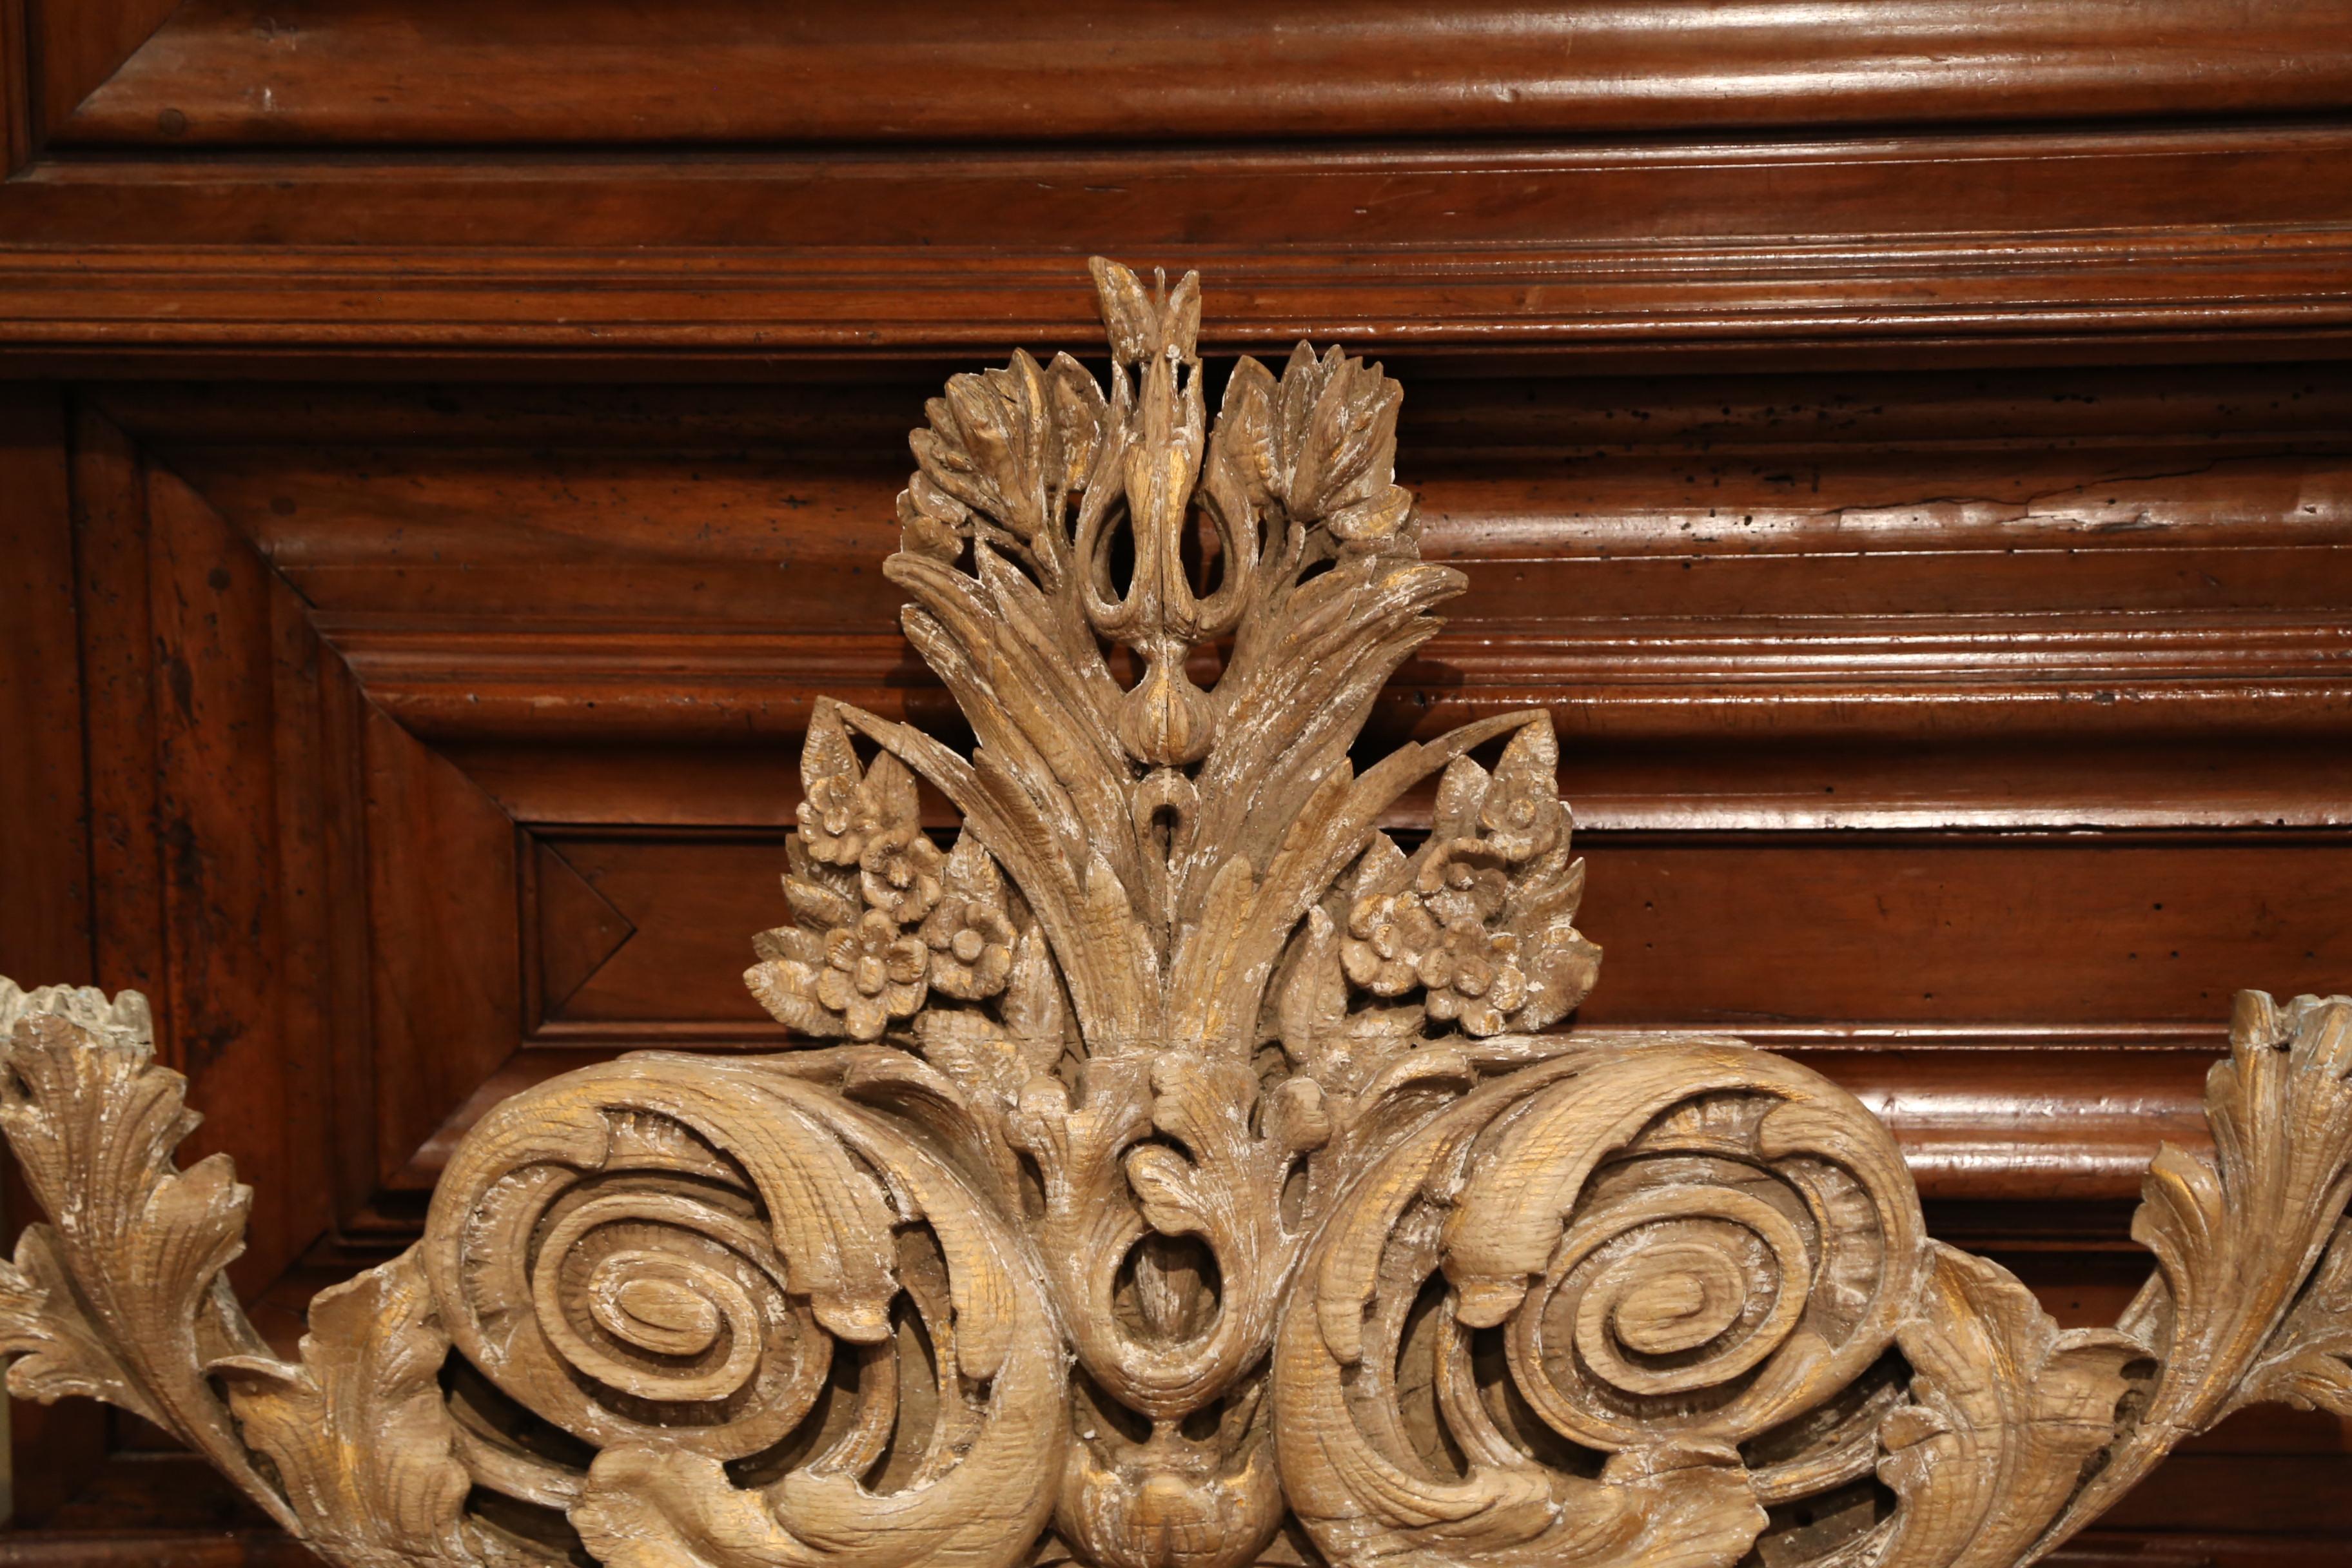 Place this important antique wood carving over a mantel; hand-carved in Normandy, France, circa 1780, the large Louis XV wall hanging sculpture features a large shell motif at the bottom flanked by scroll foliage and floral and leaf motifs on both